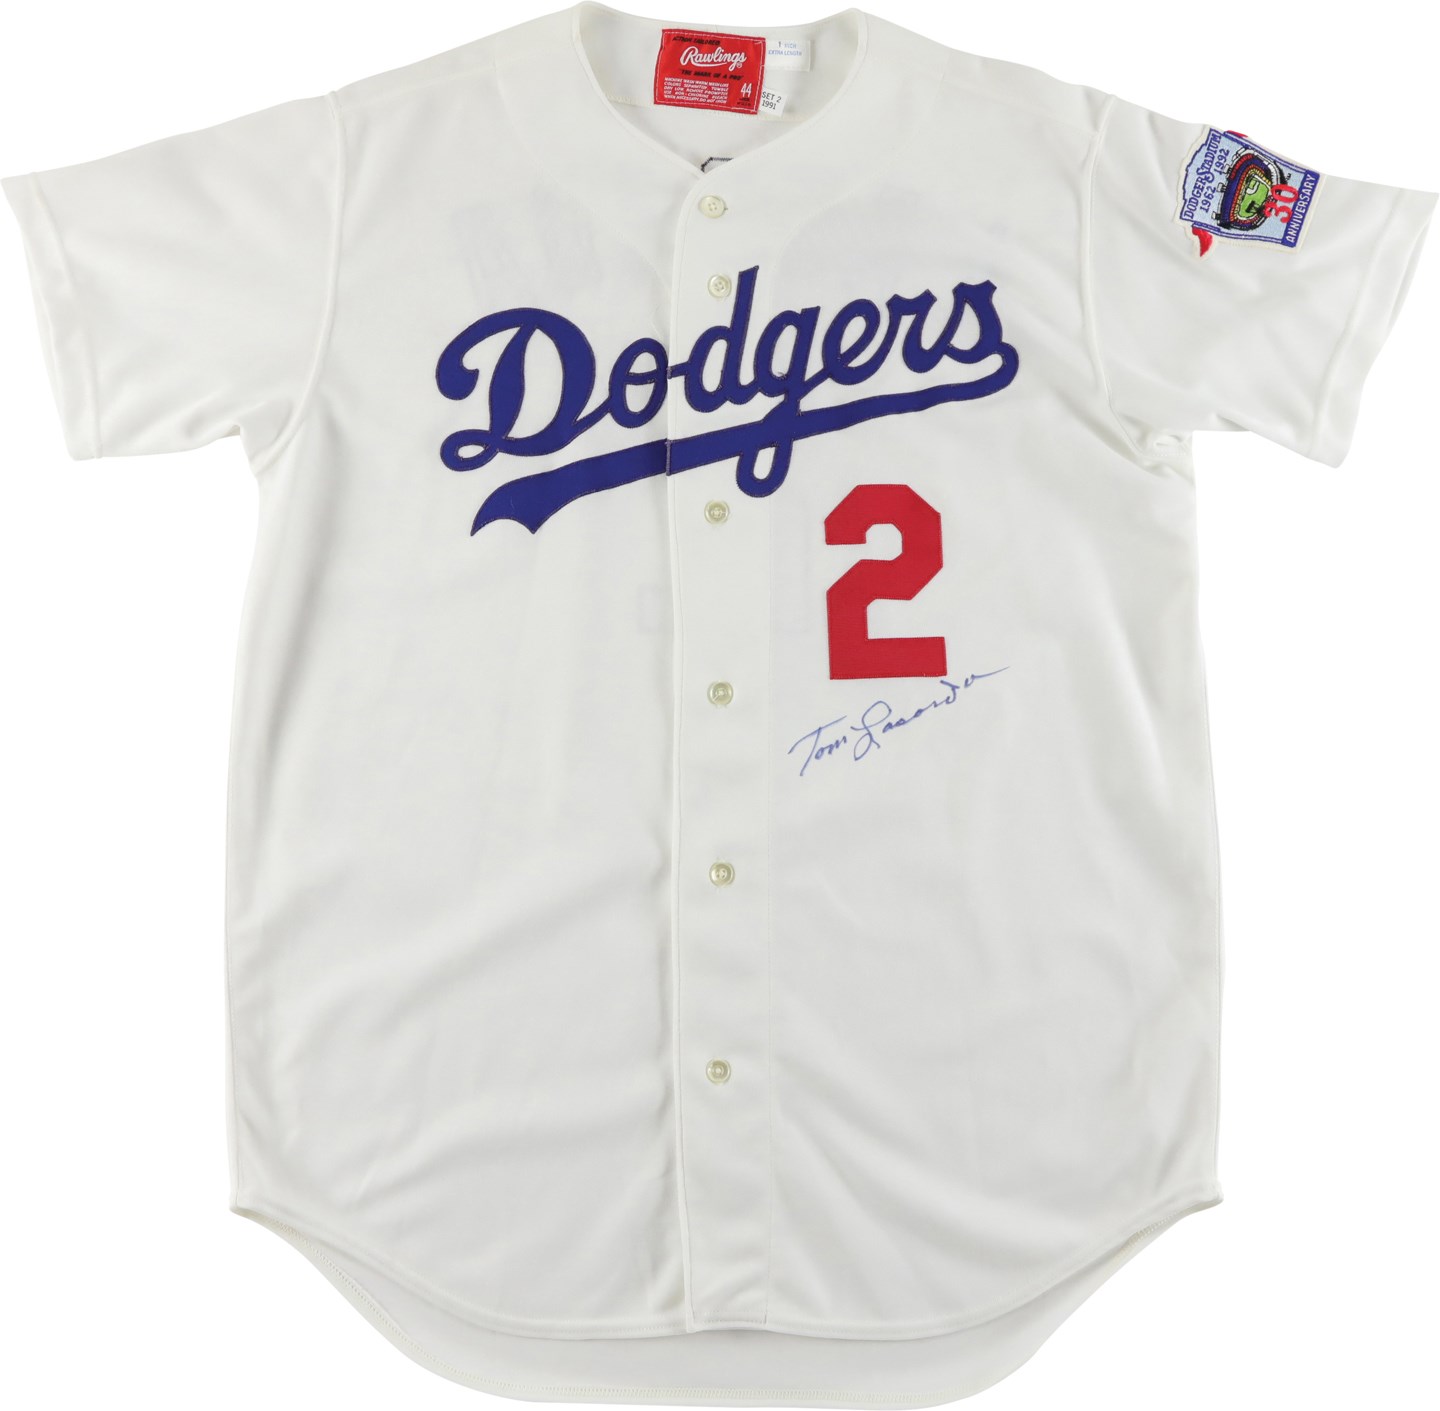 Baseball Equipment - 1992 Tommy Lasorda Los Angeles Dodgers Signed Game Worn Jersey